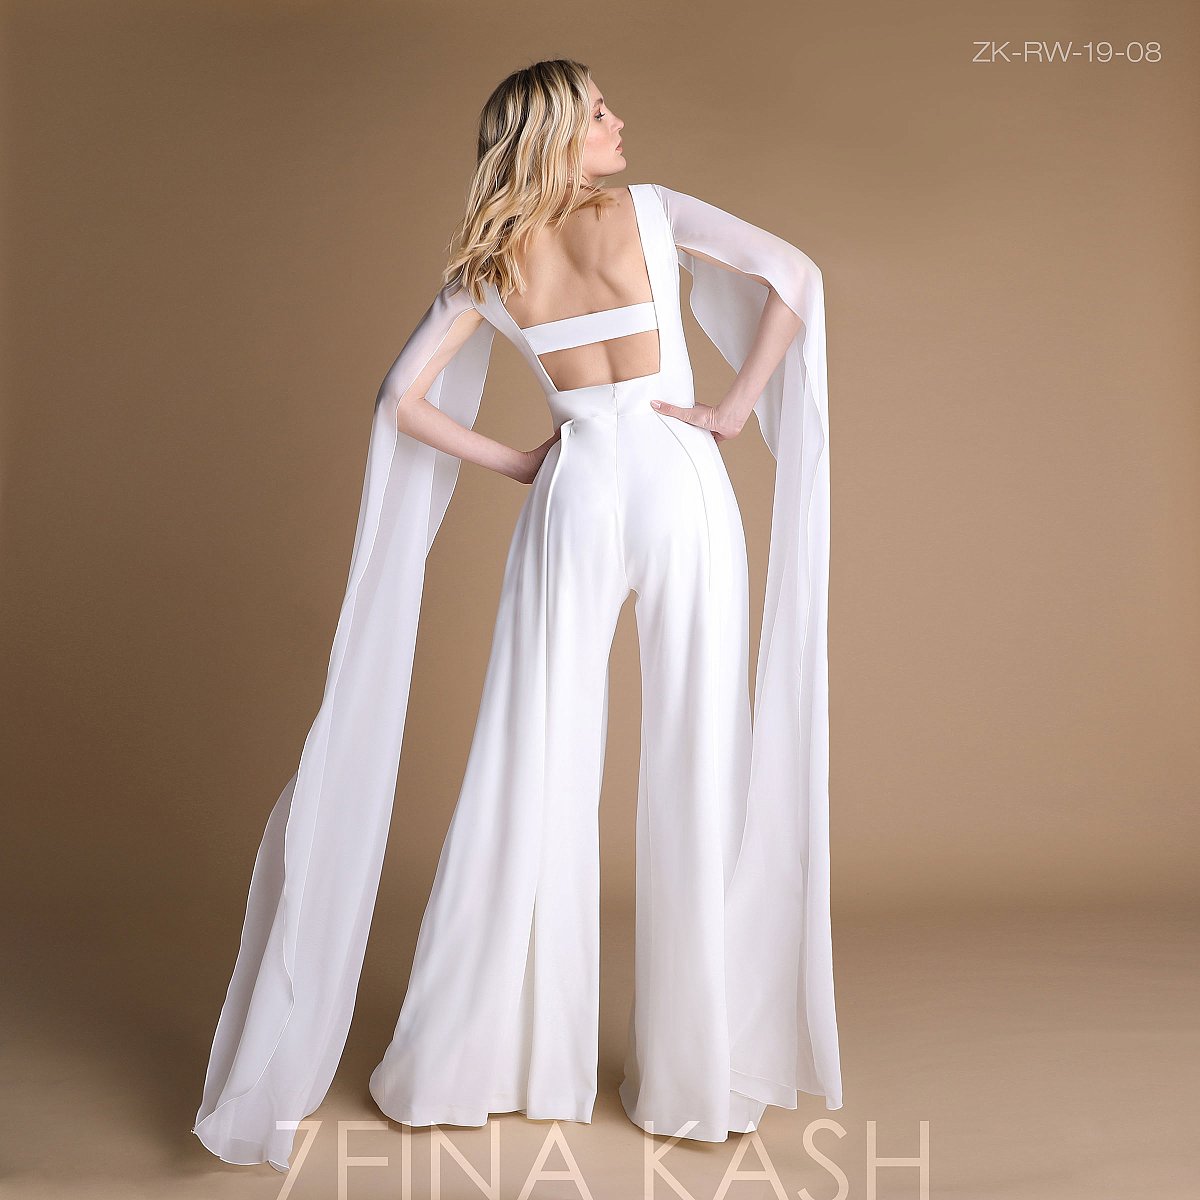 Zeina Kash 2019 collection - Ready-to-Wear - 13